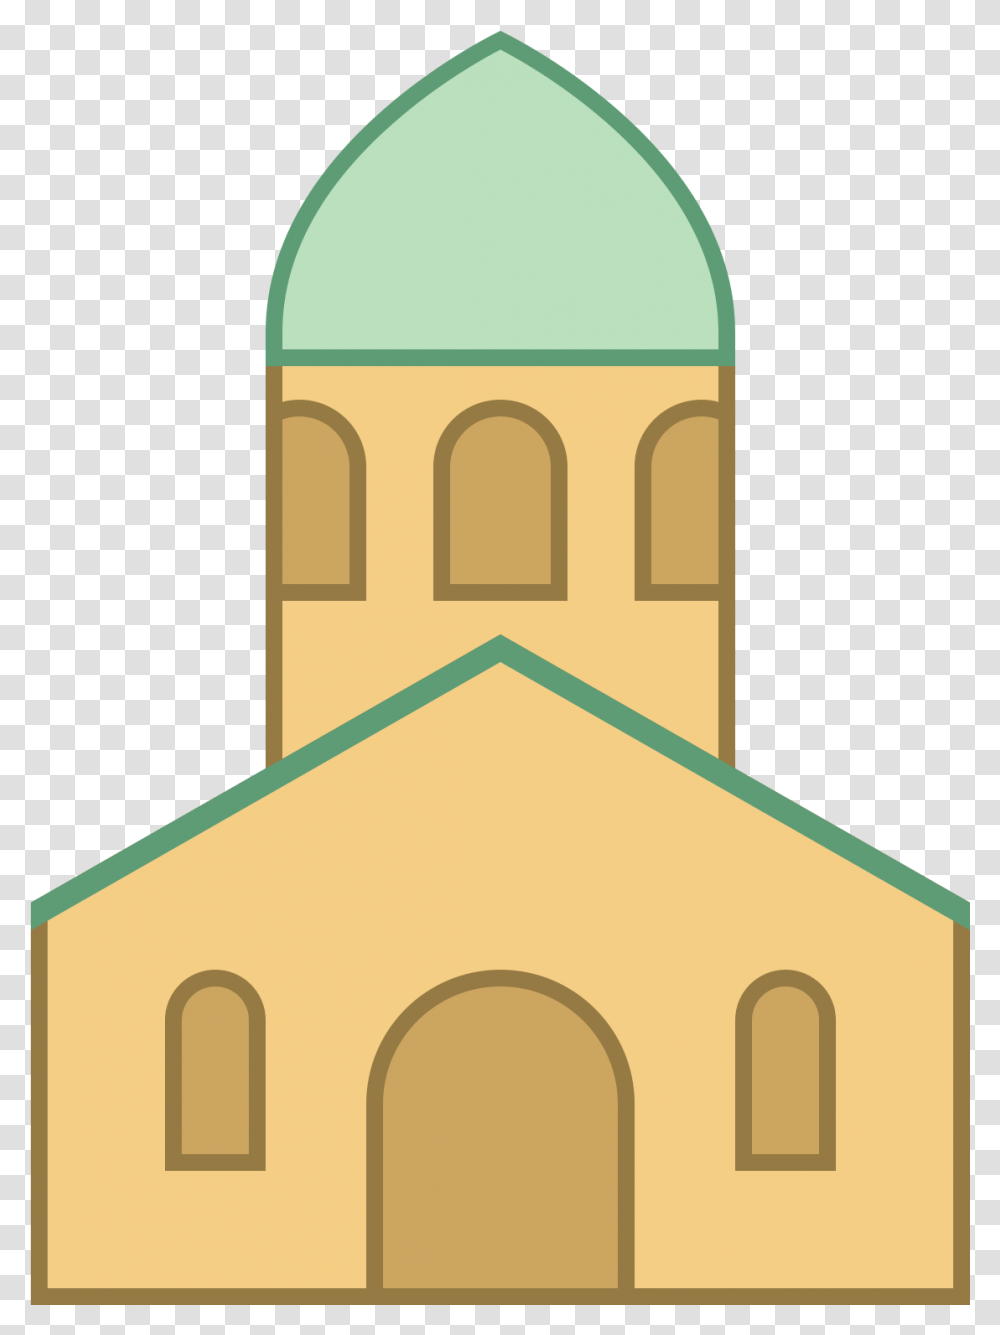 Jpg Freeuse Church Steeple Clipart Arch, Architecture, Building, Tower, Arched Transparent Png